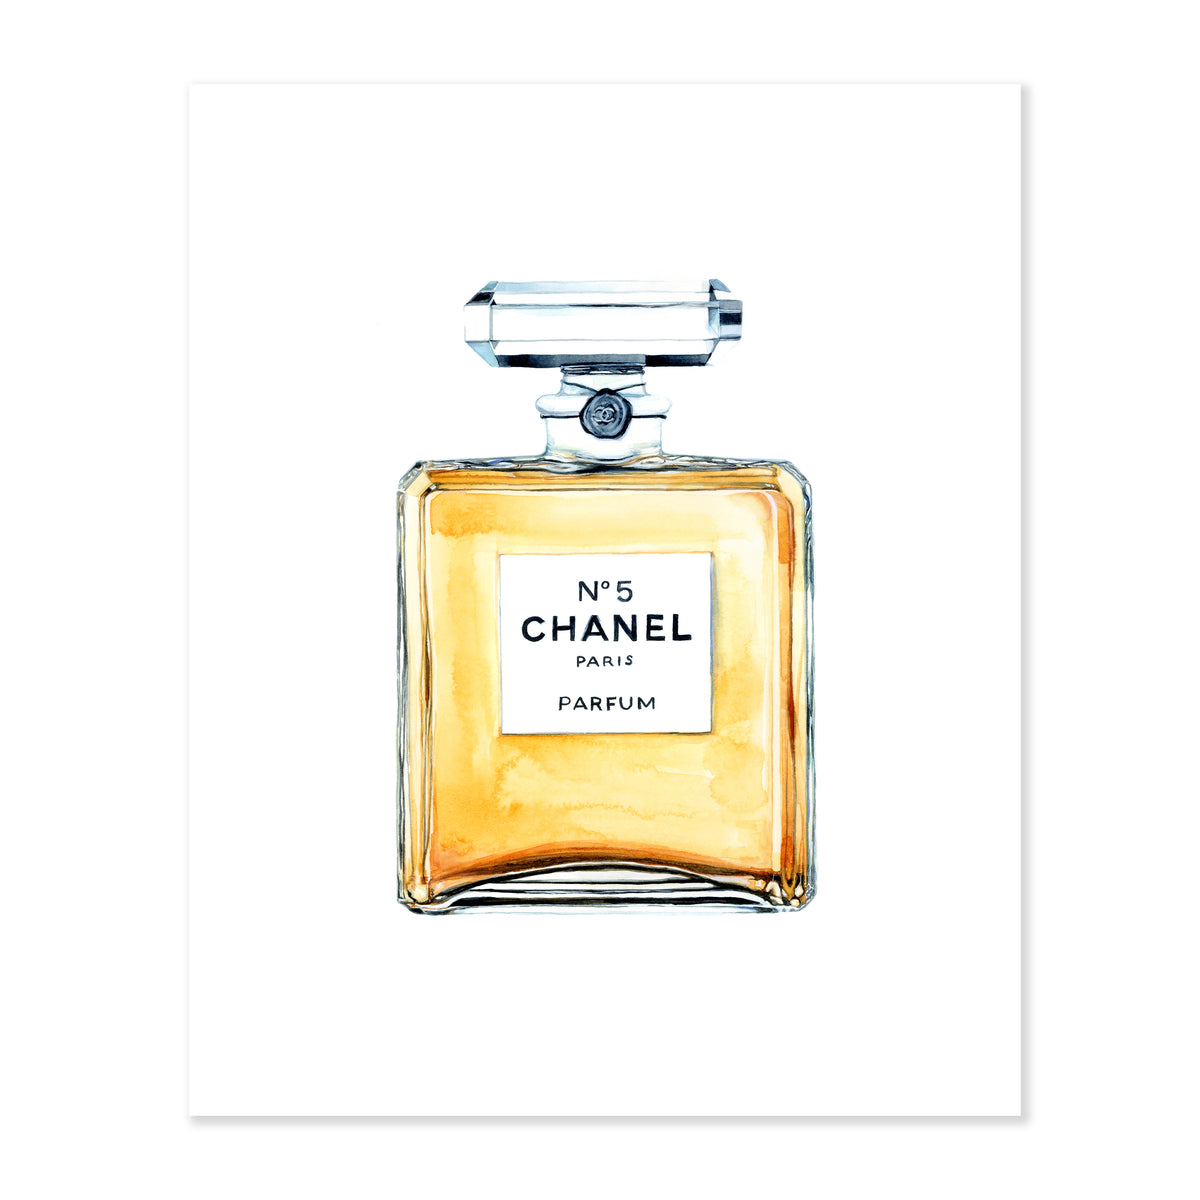 A fine art print illustrating a square glass bottle of perfume with a white square label that reads Chanel No. 5 Paris Parfum in watercolor on a soft white background